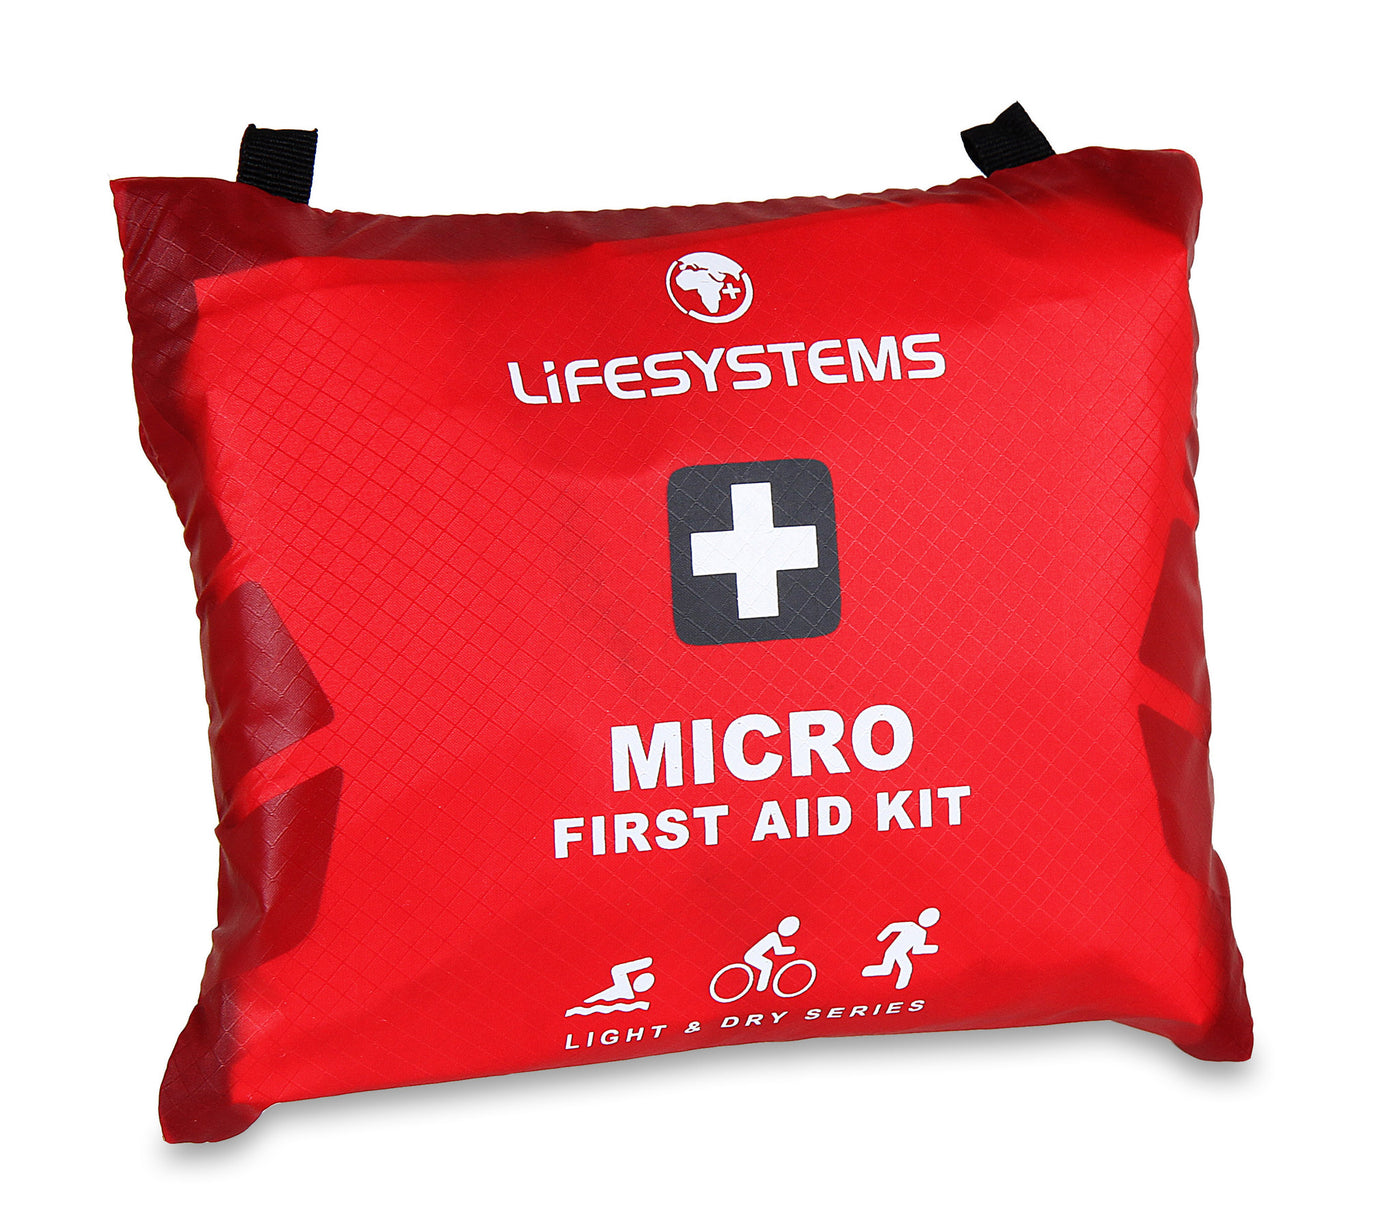 Lifesystems Light and Dry Micro First Aid Kit | Adventure Racing | NZ